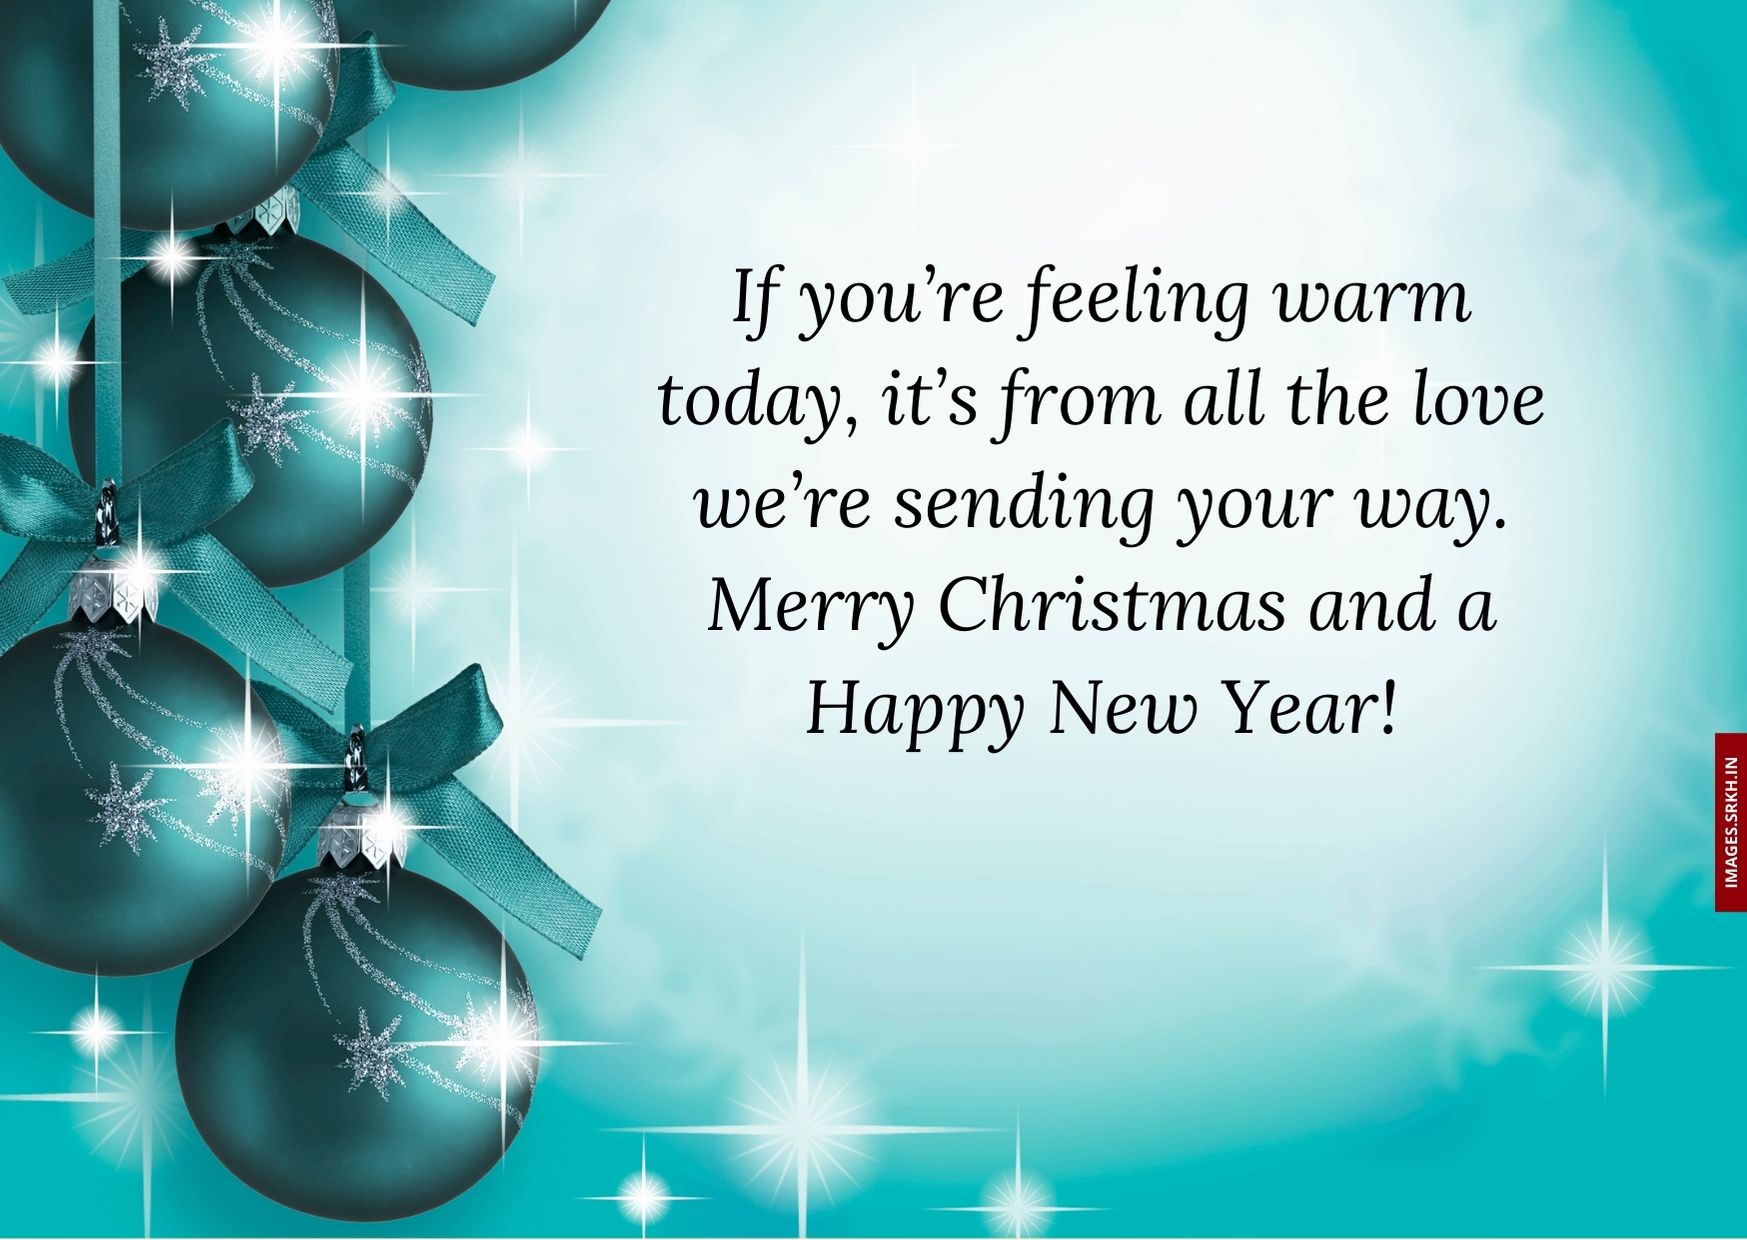 Merry Christmas Quotes And Images